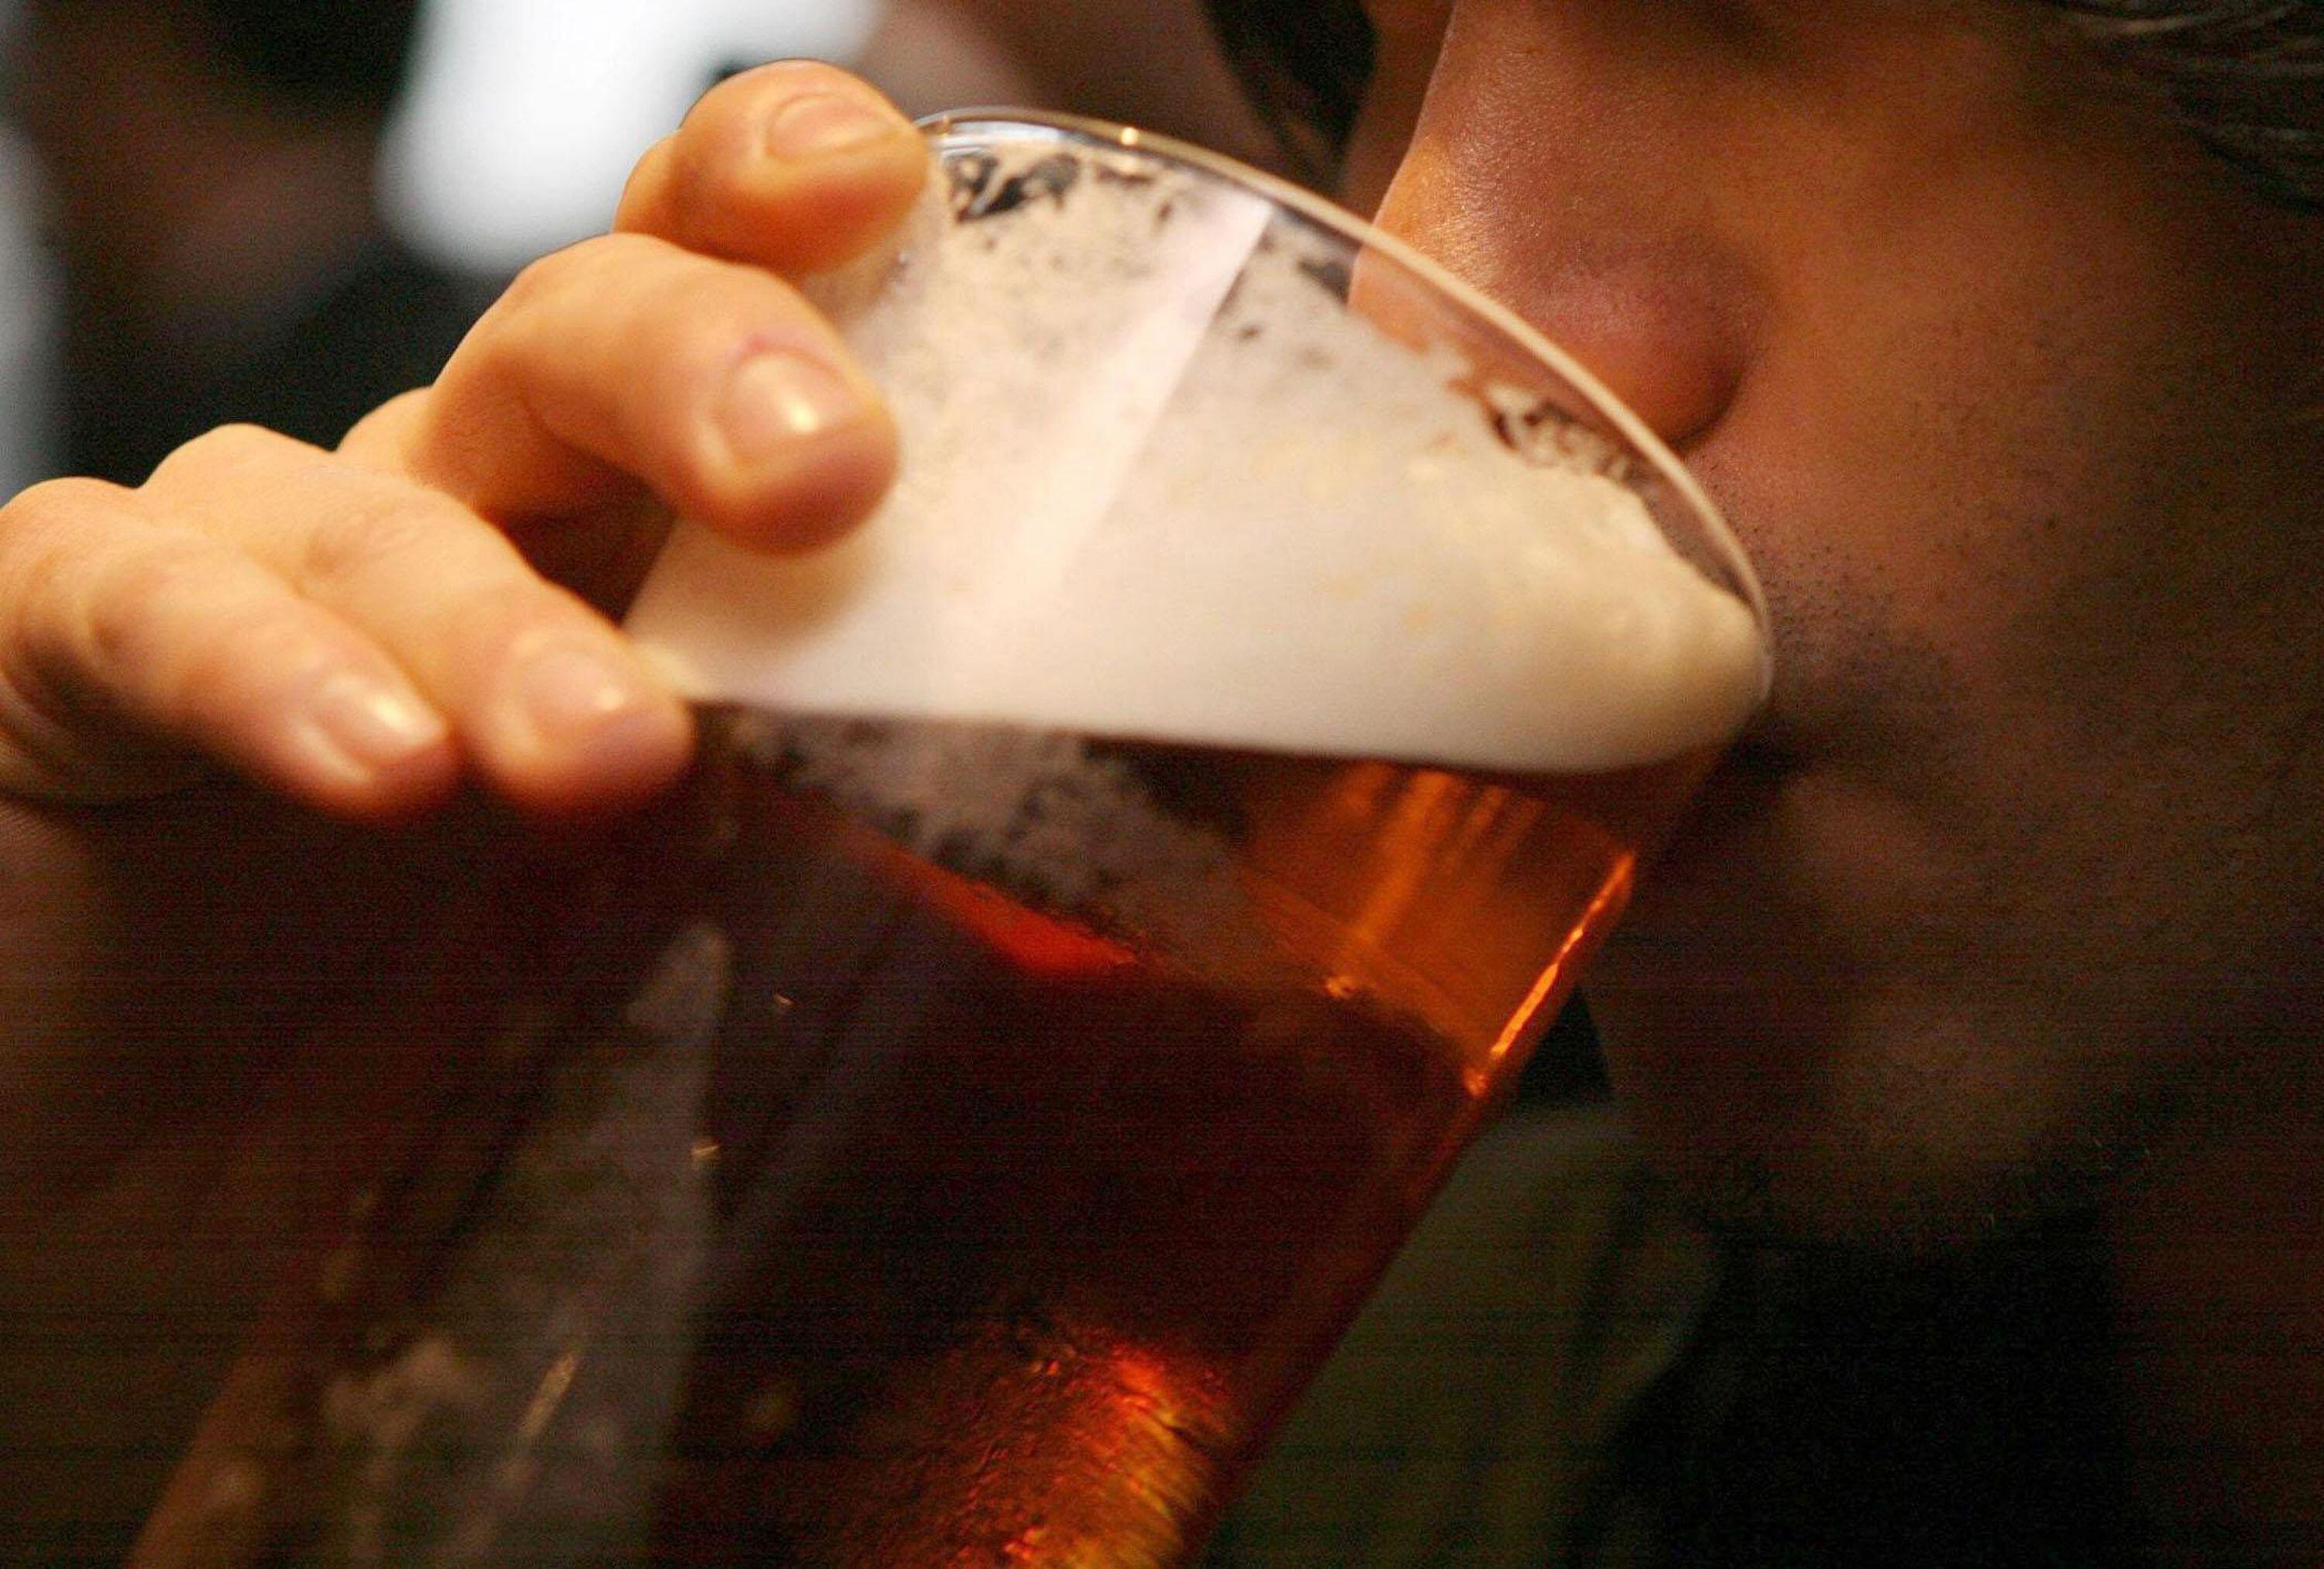 Booze ban: the 21-plus rule tends to be strictly enforced over the pond